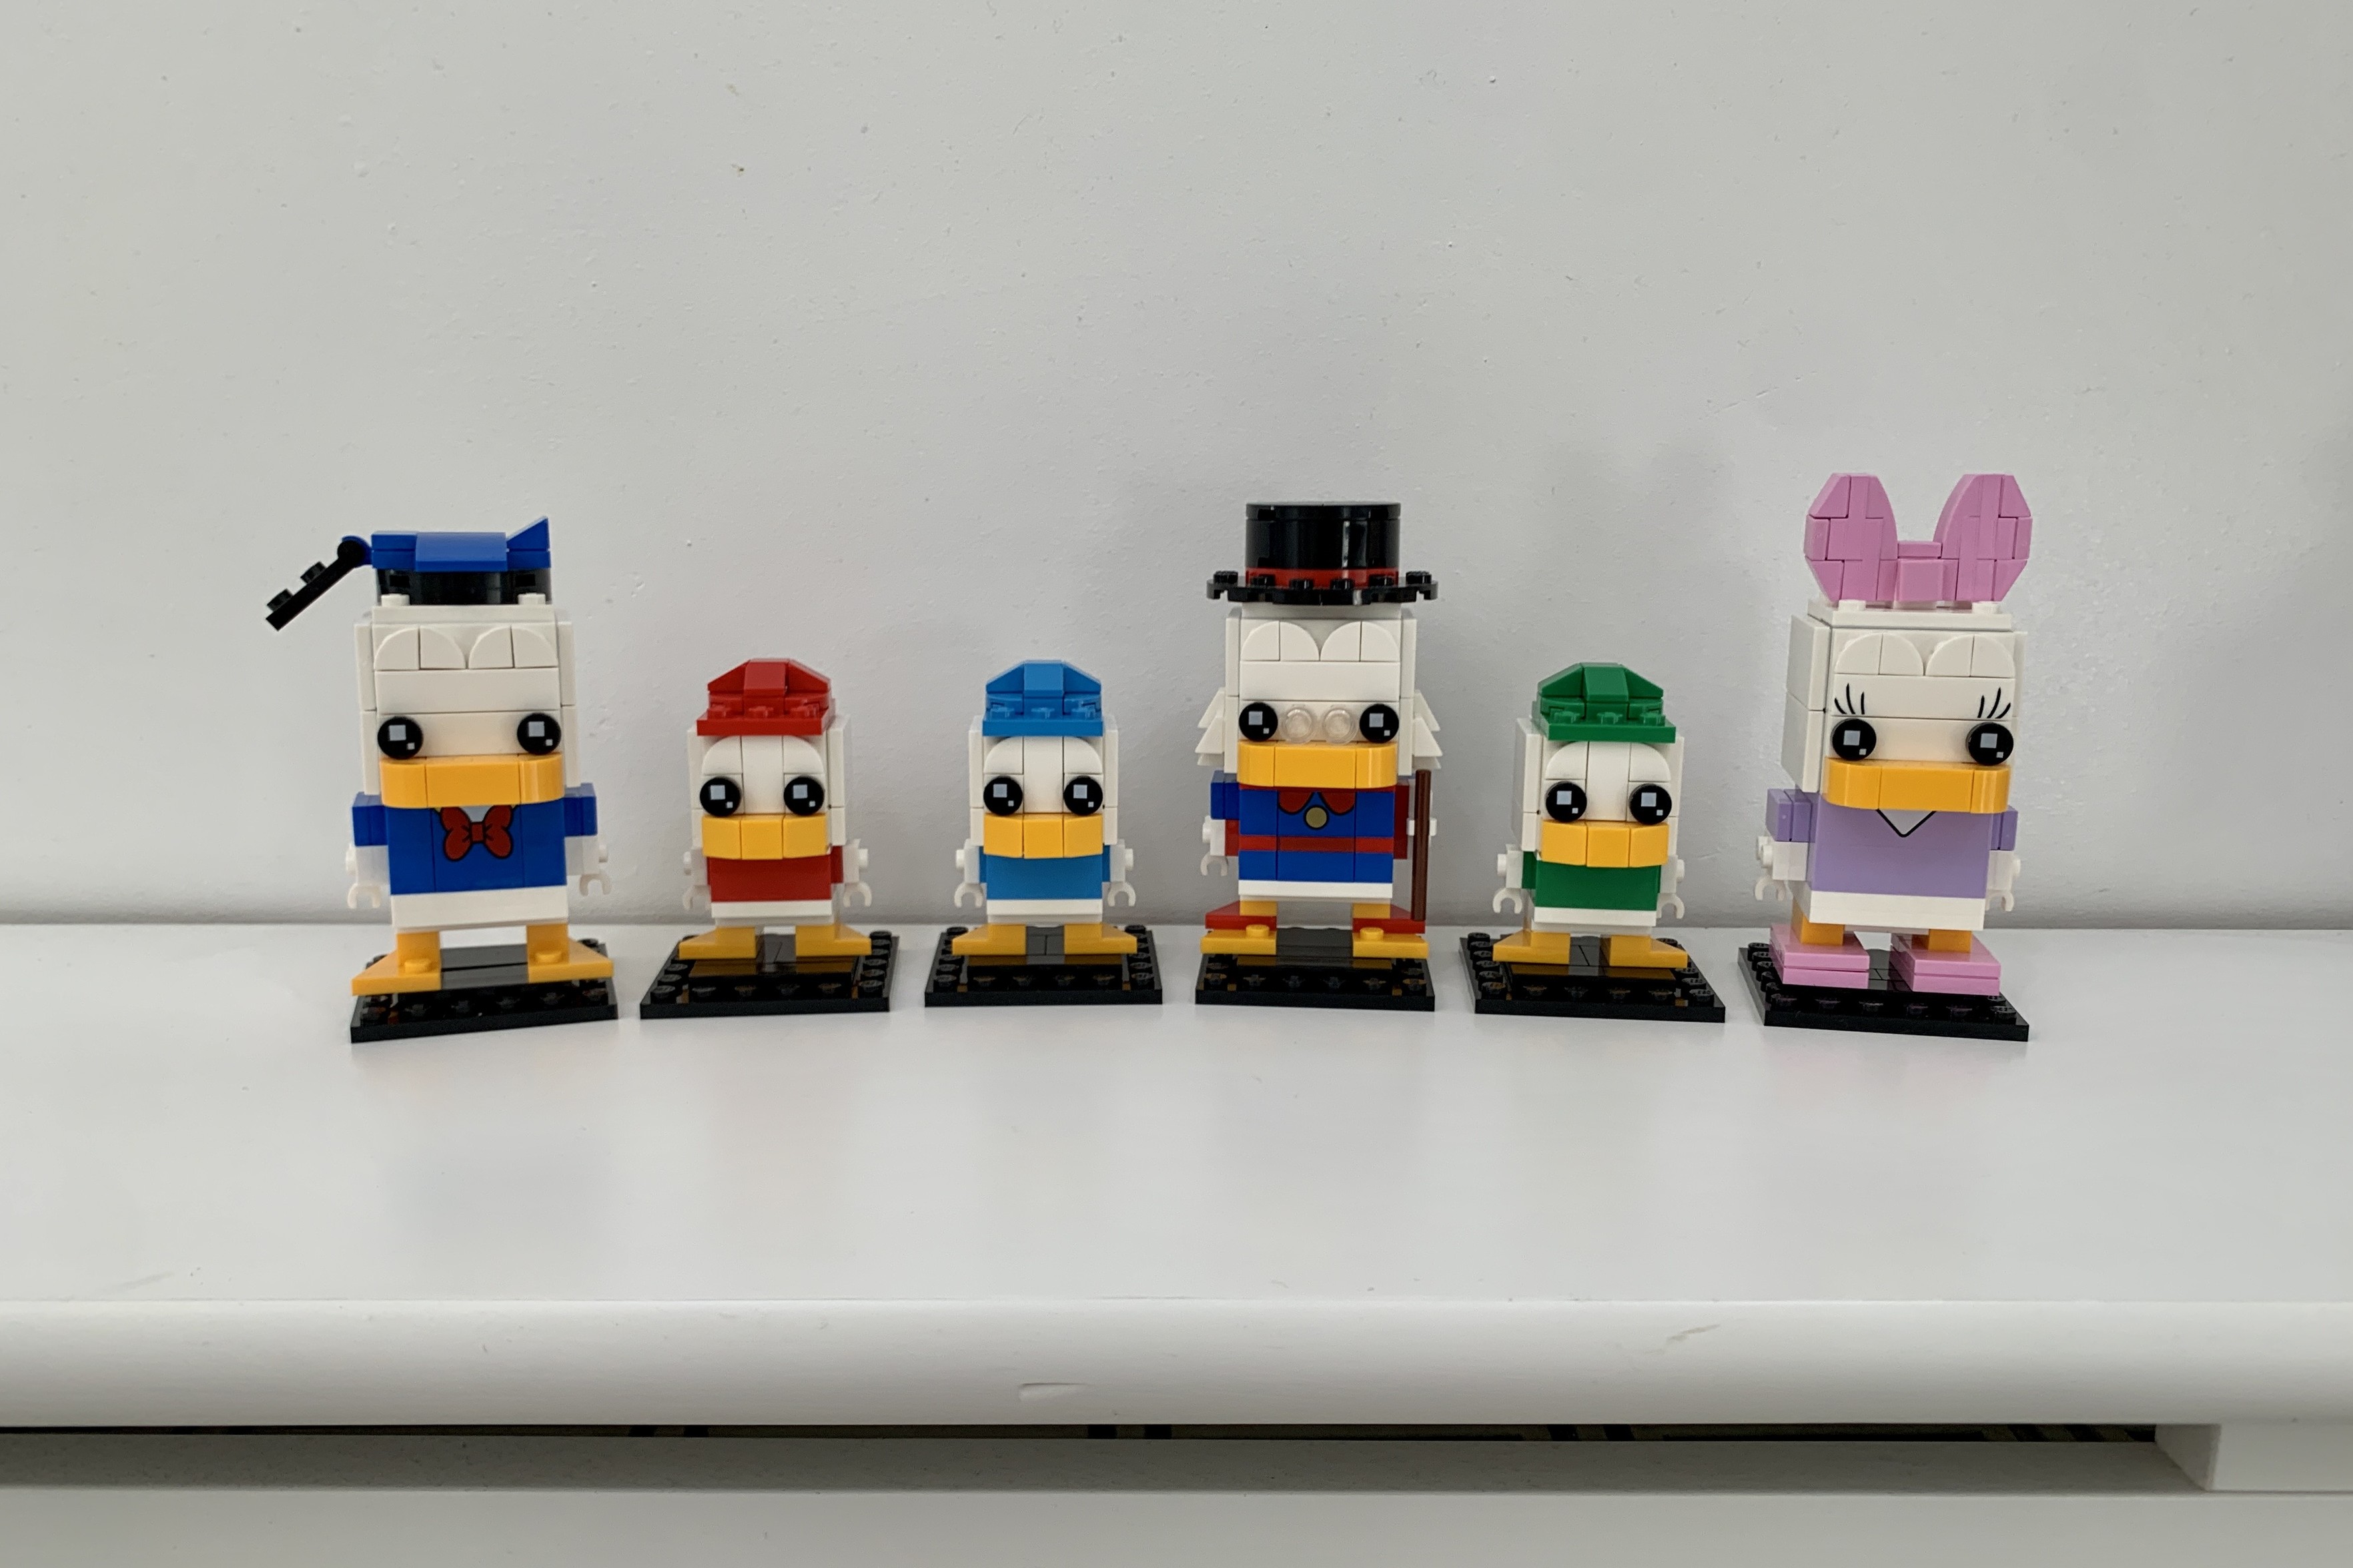 6 Lego BrickHeadz characters from the Disney Duck family. From left to right, Donald, Huey, Dewey, Louie, Scrooge, Louie and Daisy.